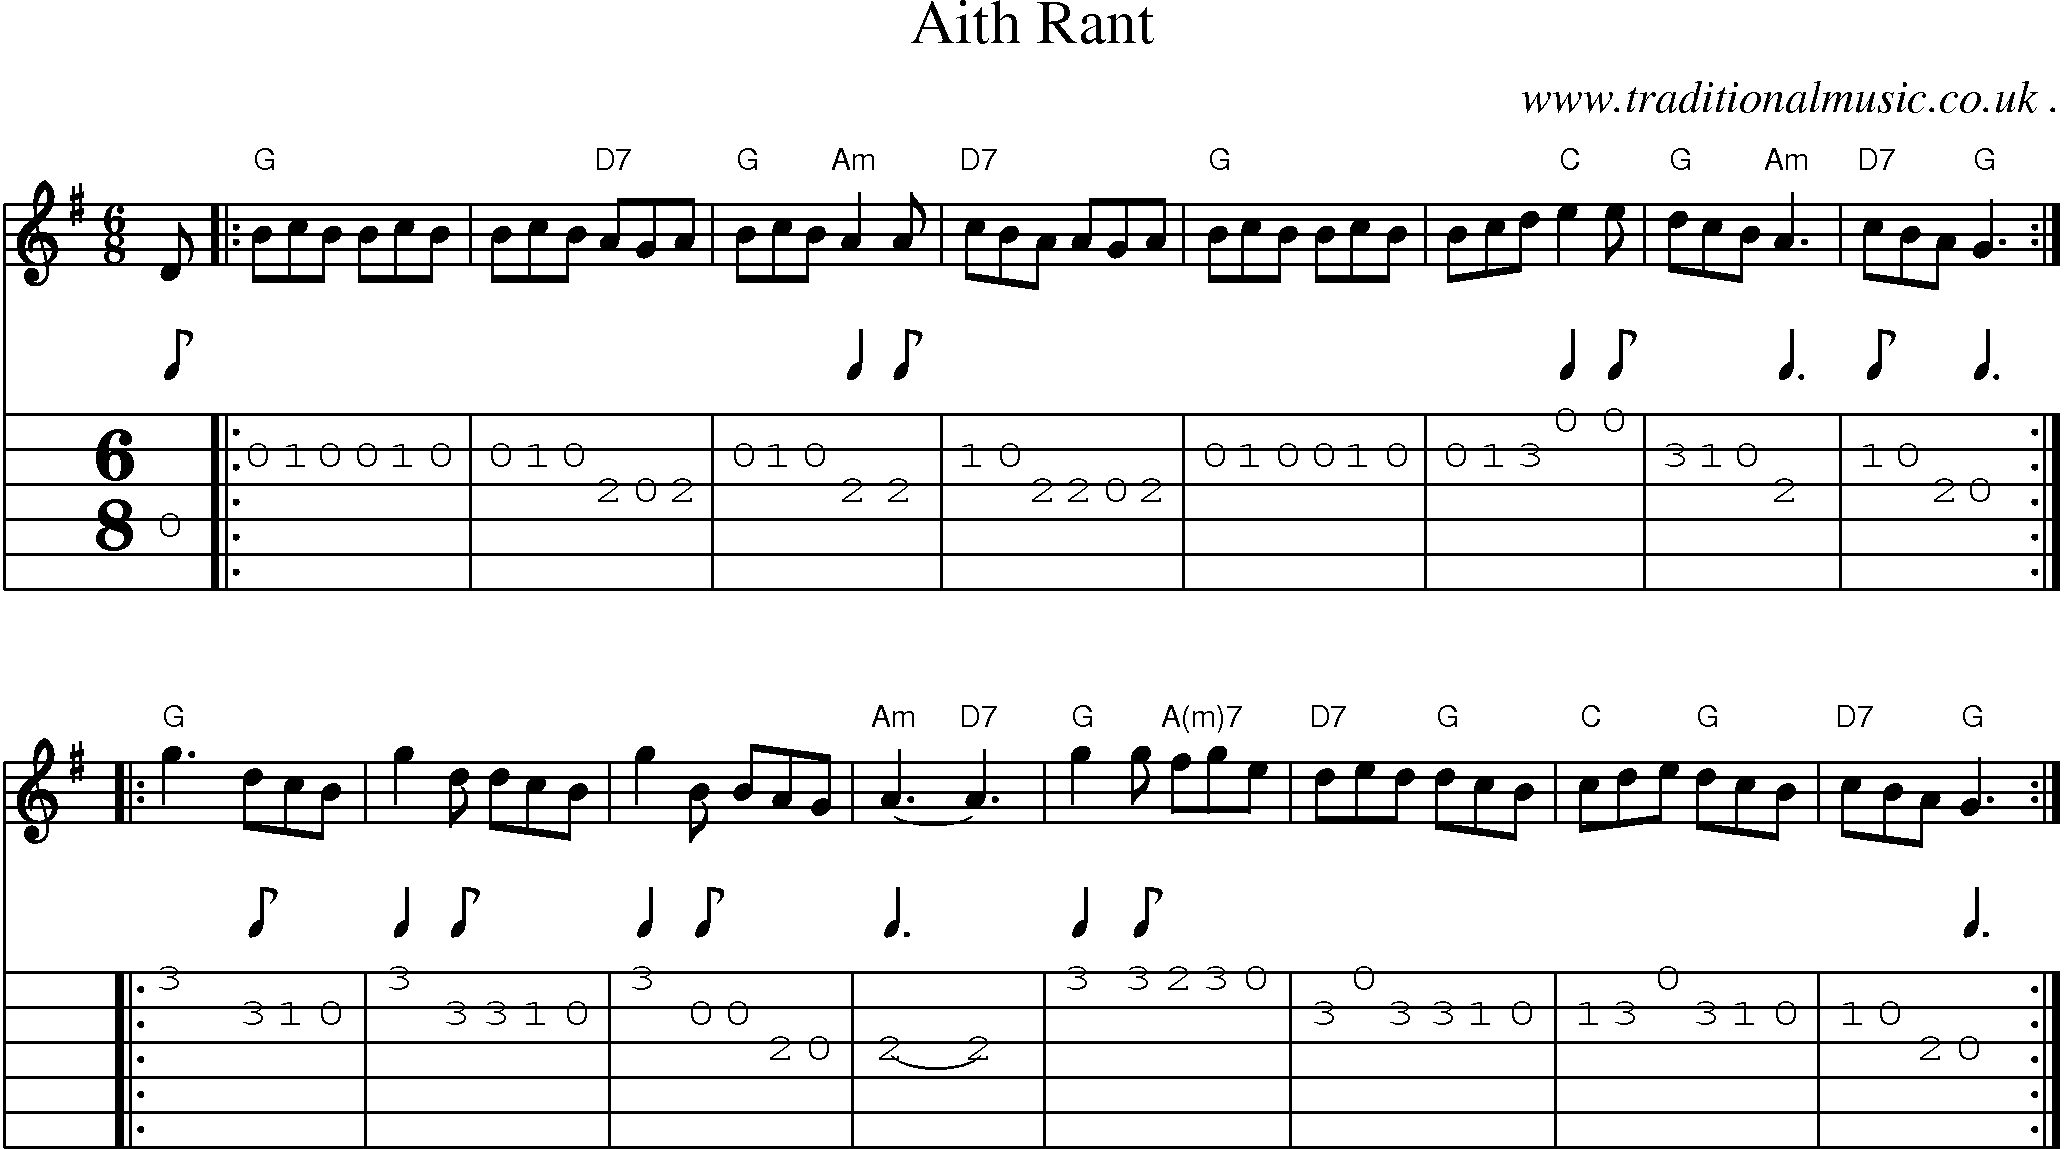 Sheet-music  score, Chords and Guitar Tabs for Aith Rant